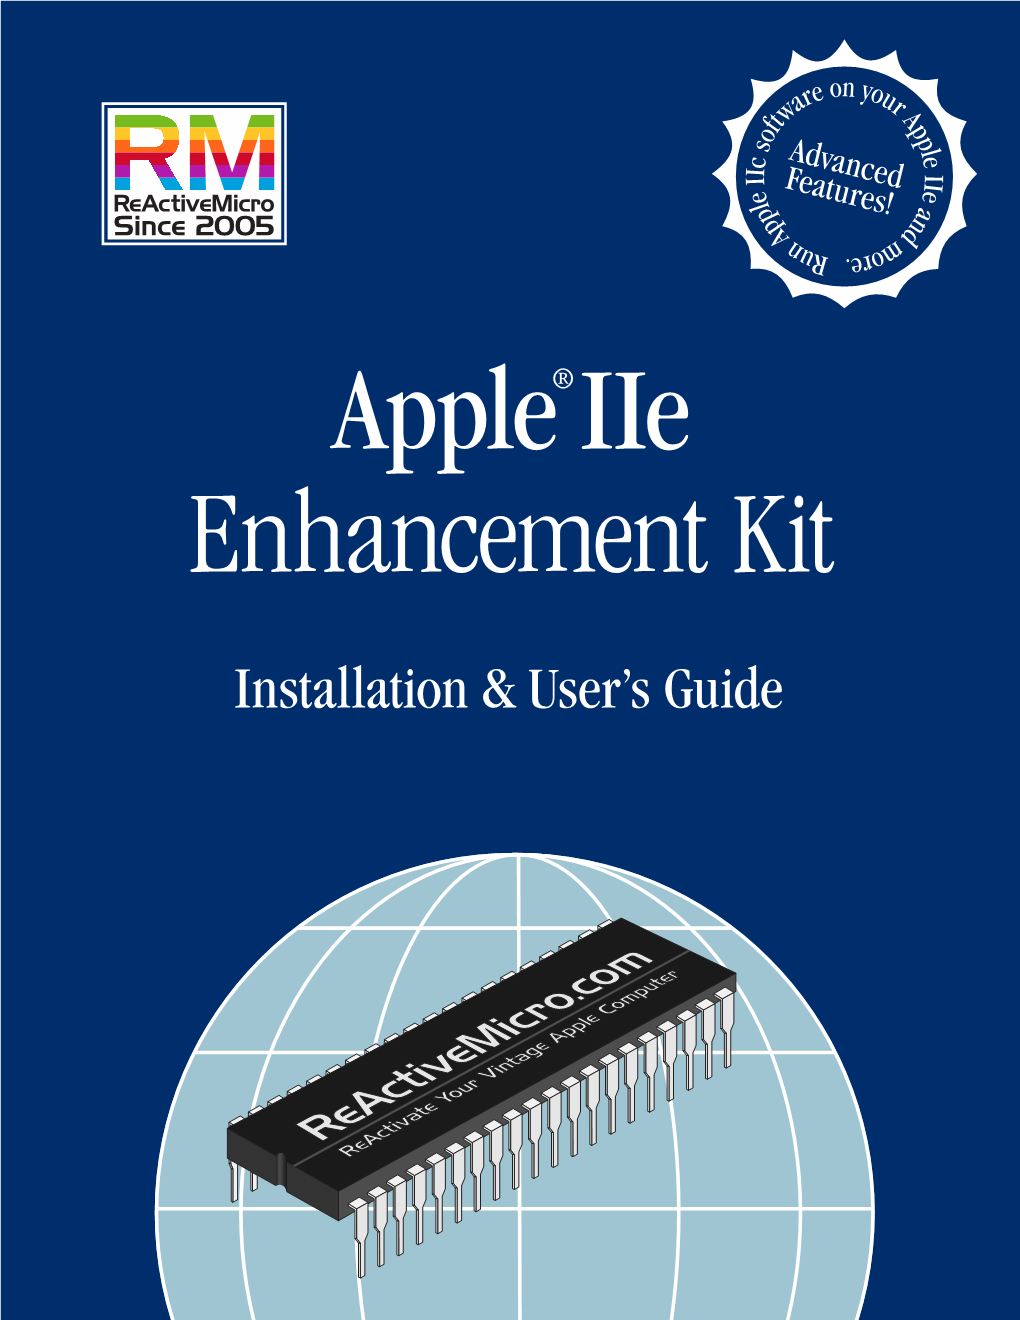 Apple Iie Enhancement Gives You....1 Flexibility and Convenience